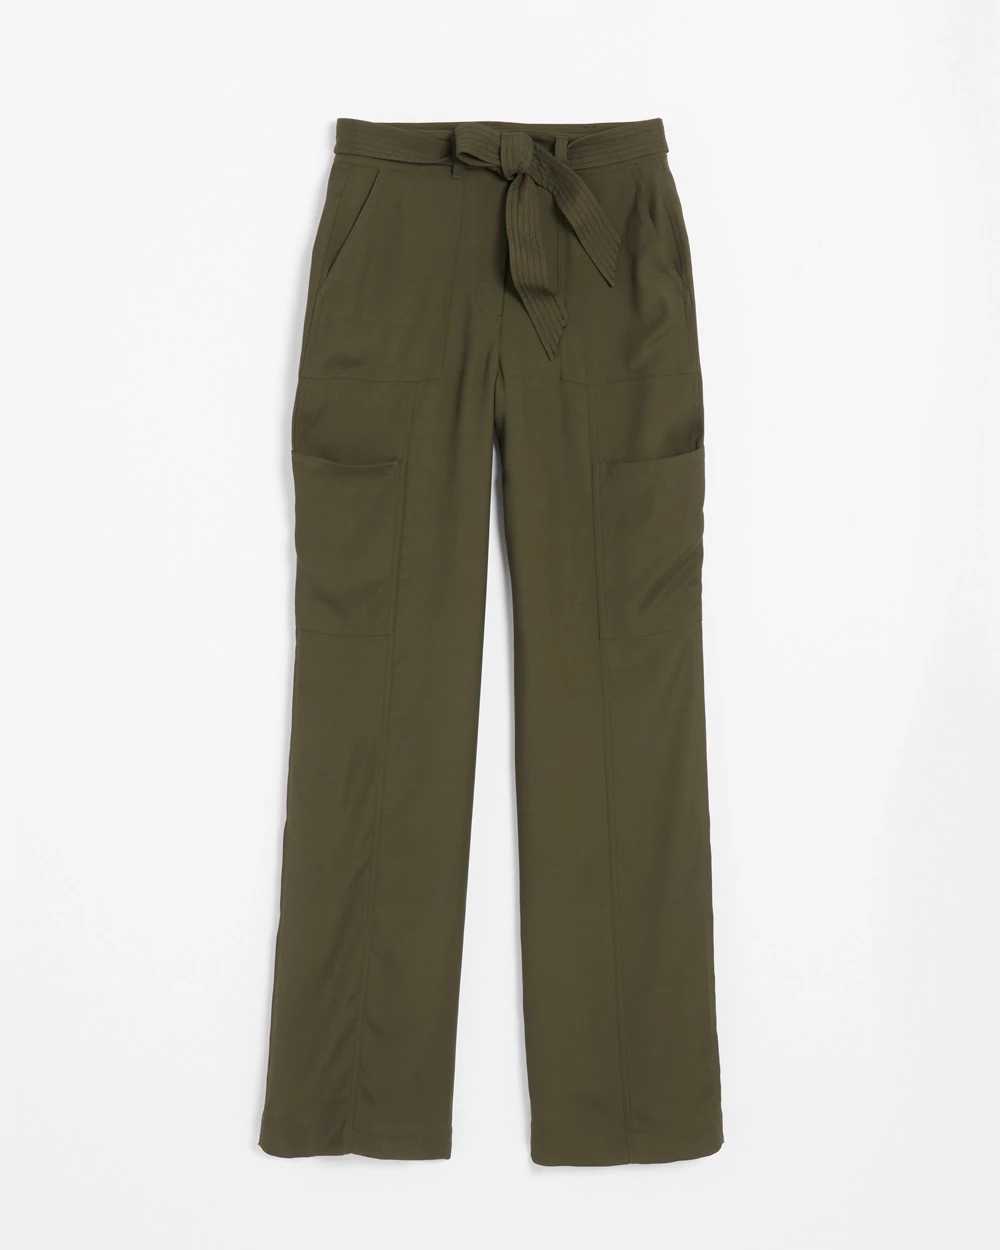 Belted Utility Wide Leg Trouser click to view larger image.